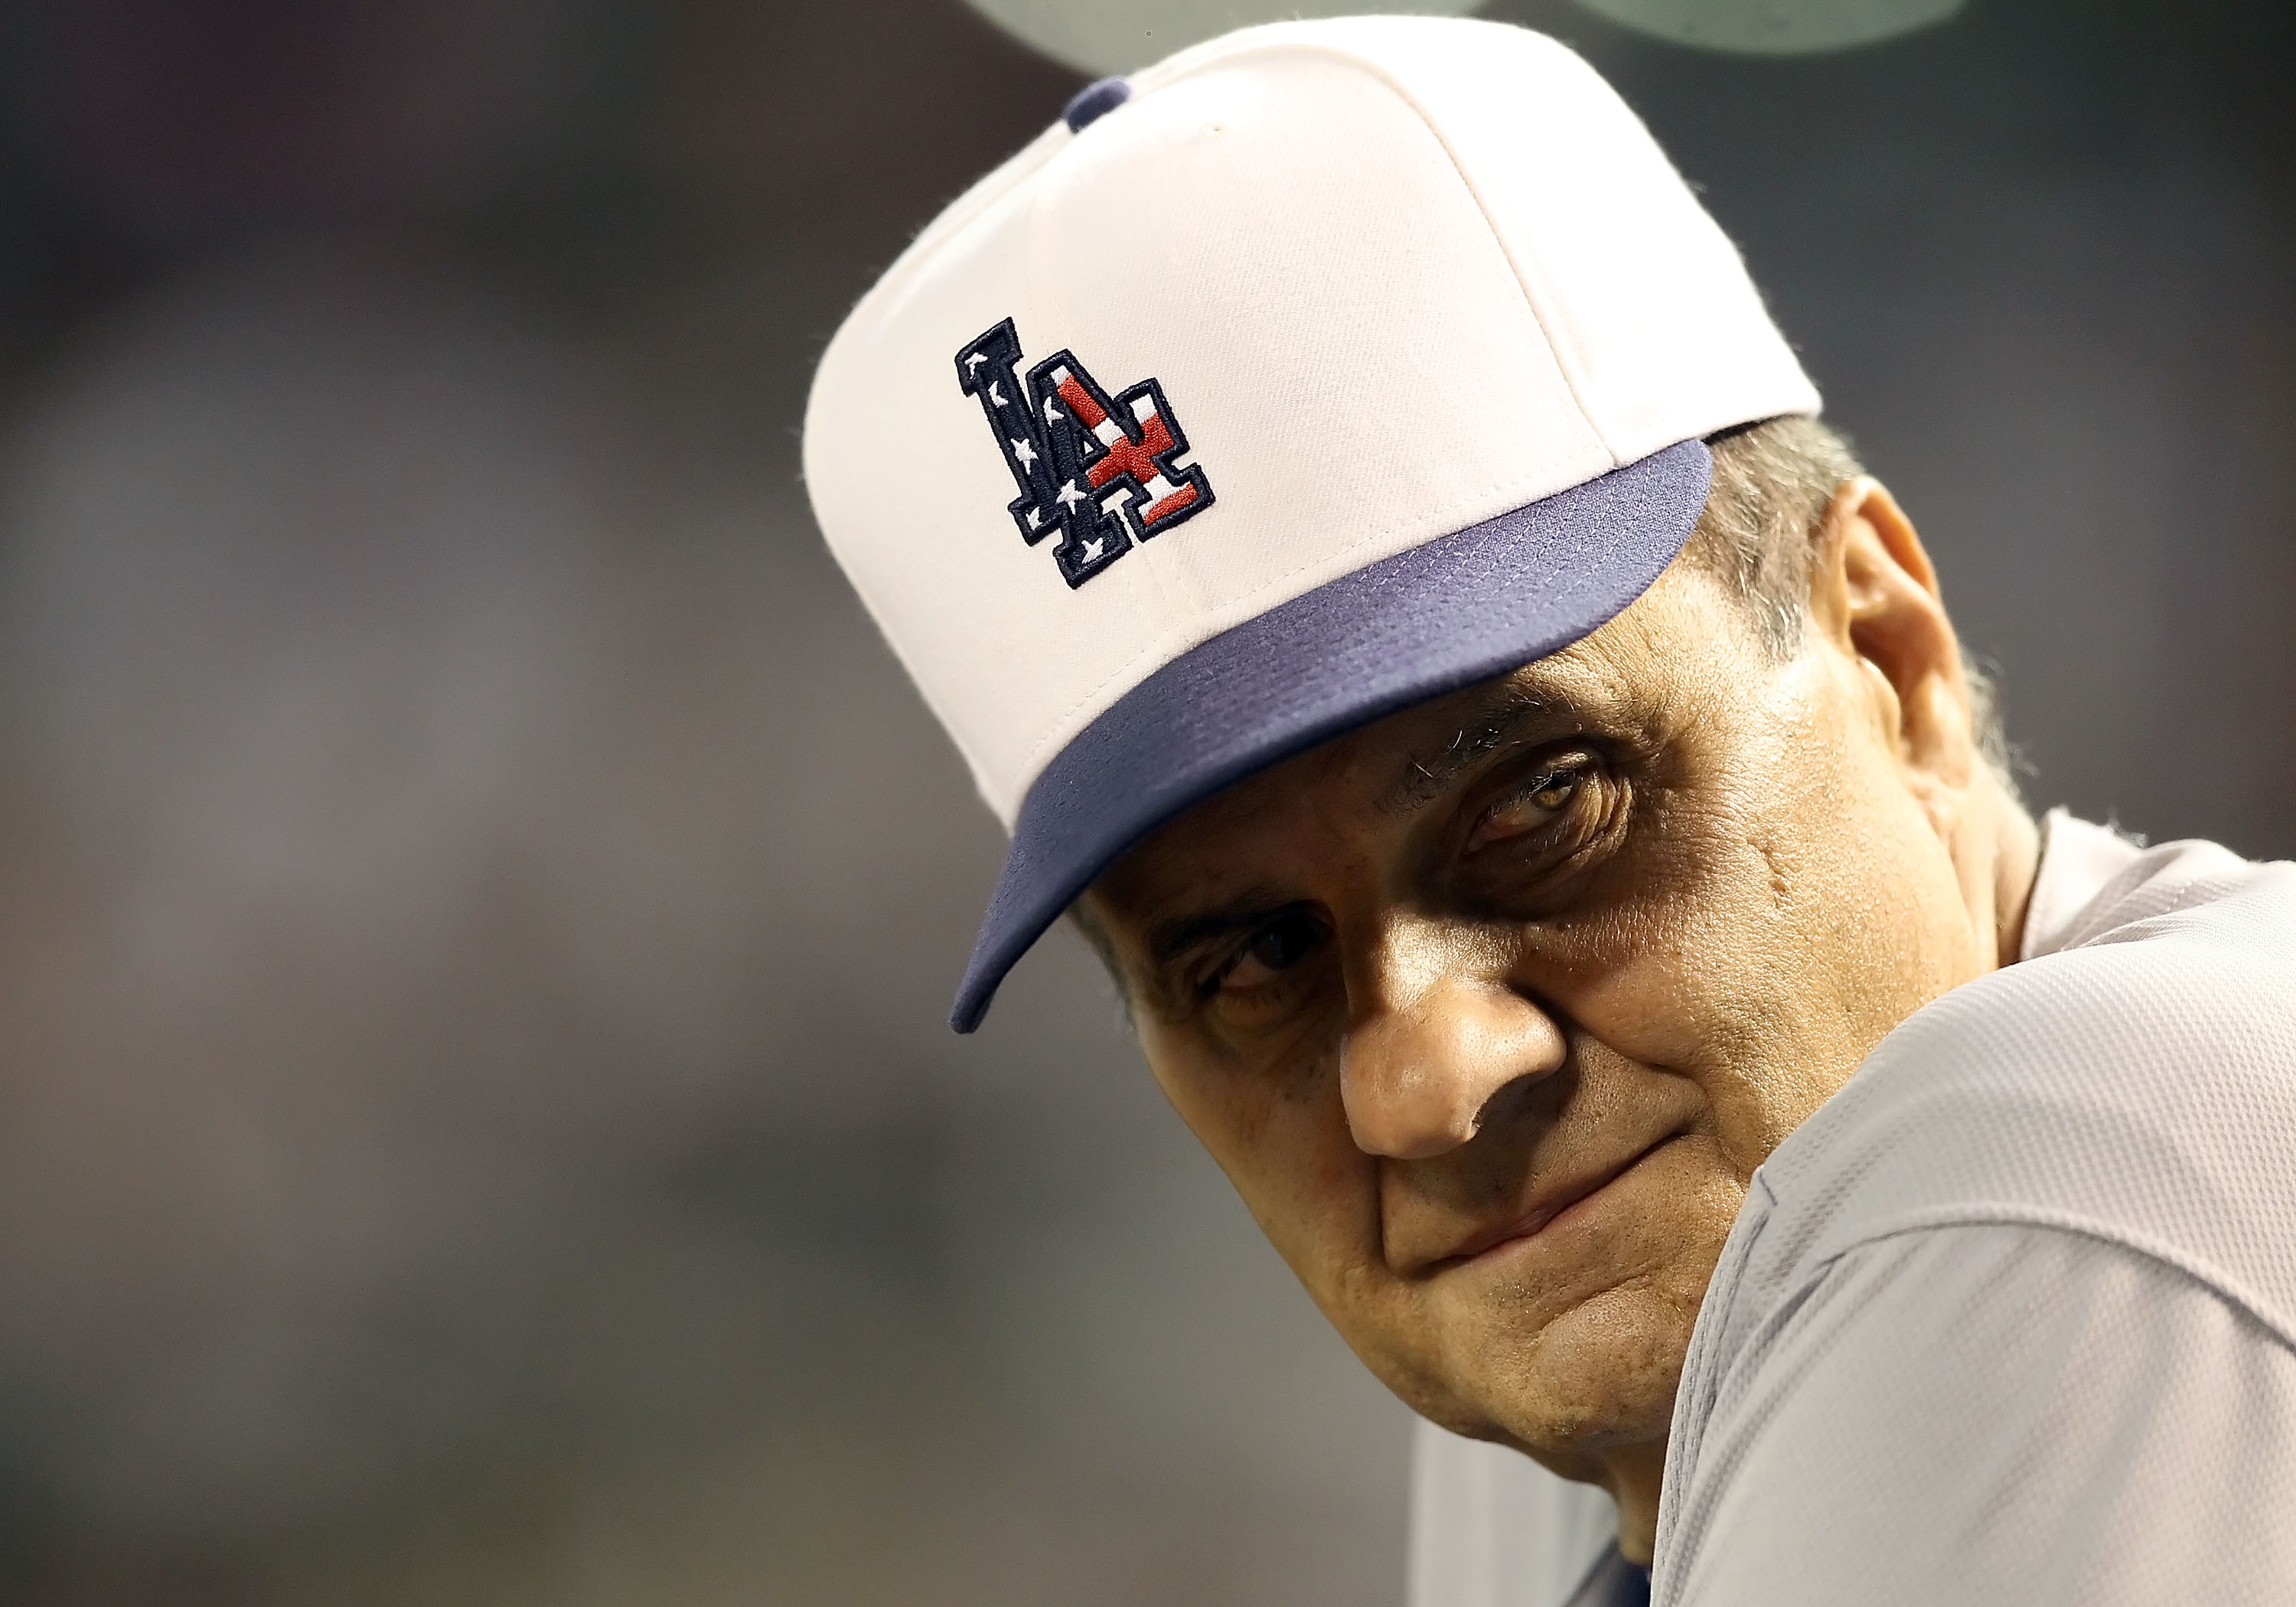 Tony La Russa Passes John McGraw for 2nd-Most Wins by Manager in MLB  History, News, Scores, Highlights, Stats, and Rumors